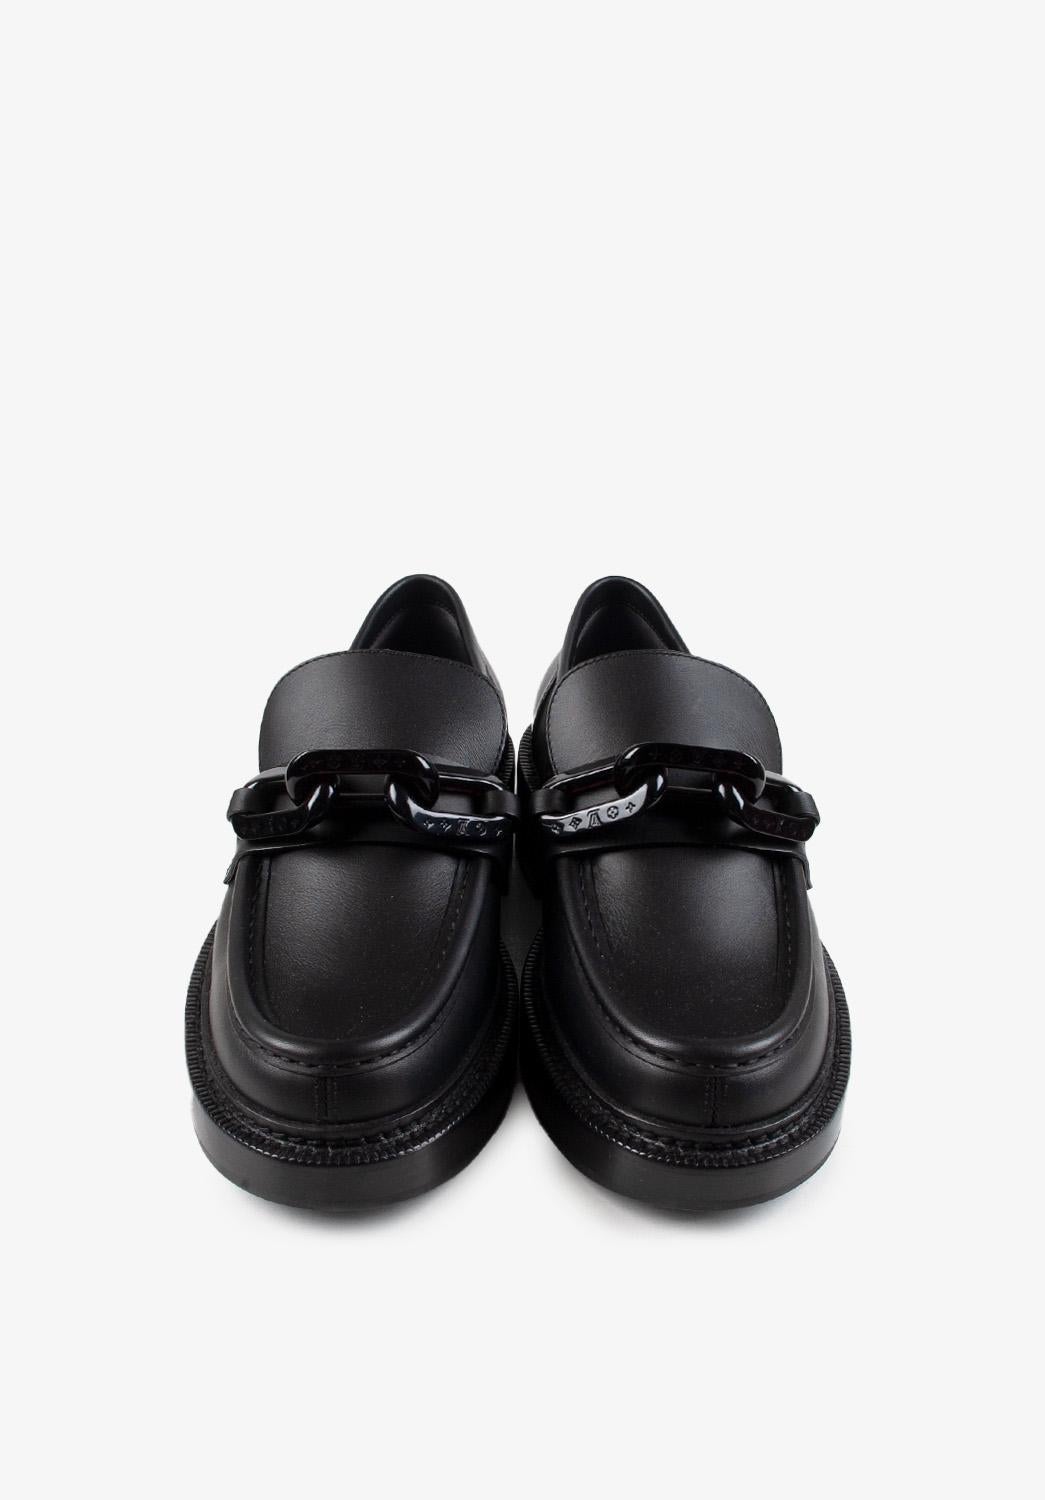 Item for sale is 100% genuine Louis Vuitton Women Loafers, S121
Color: Black
Material: Leather
Tag size: EUR 38 1/2
These shoes are great quality item. Rate 10 of 10, new without box
Actual  measurements (inches/centimeters):
Width: 10 cm or 3